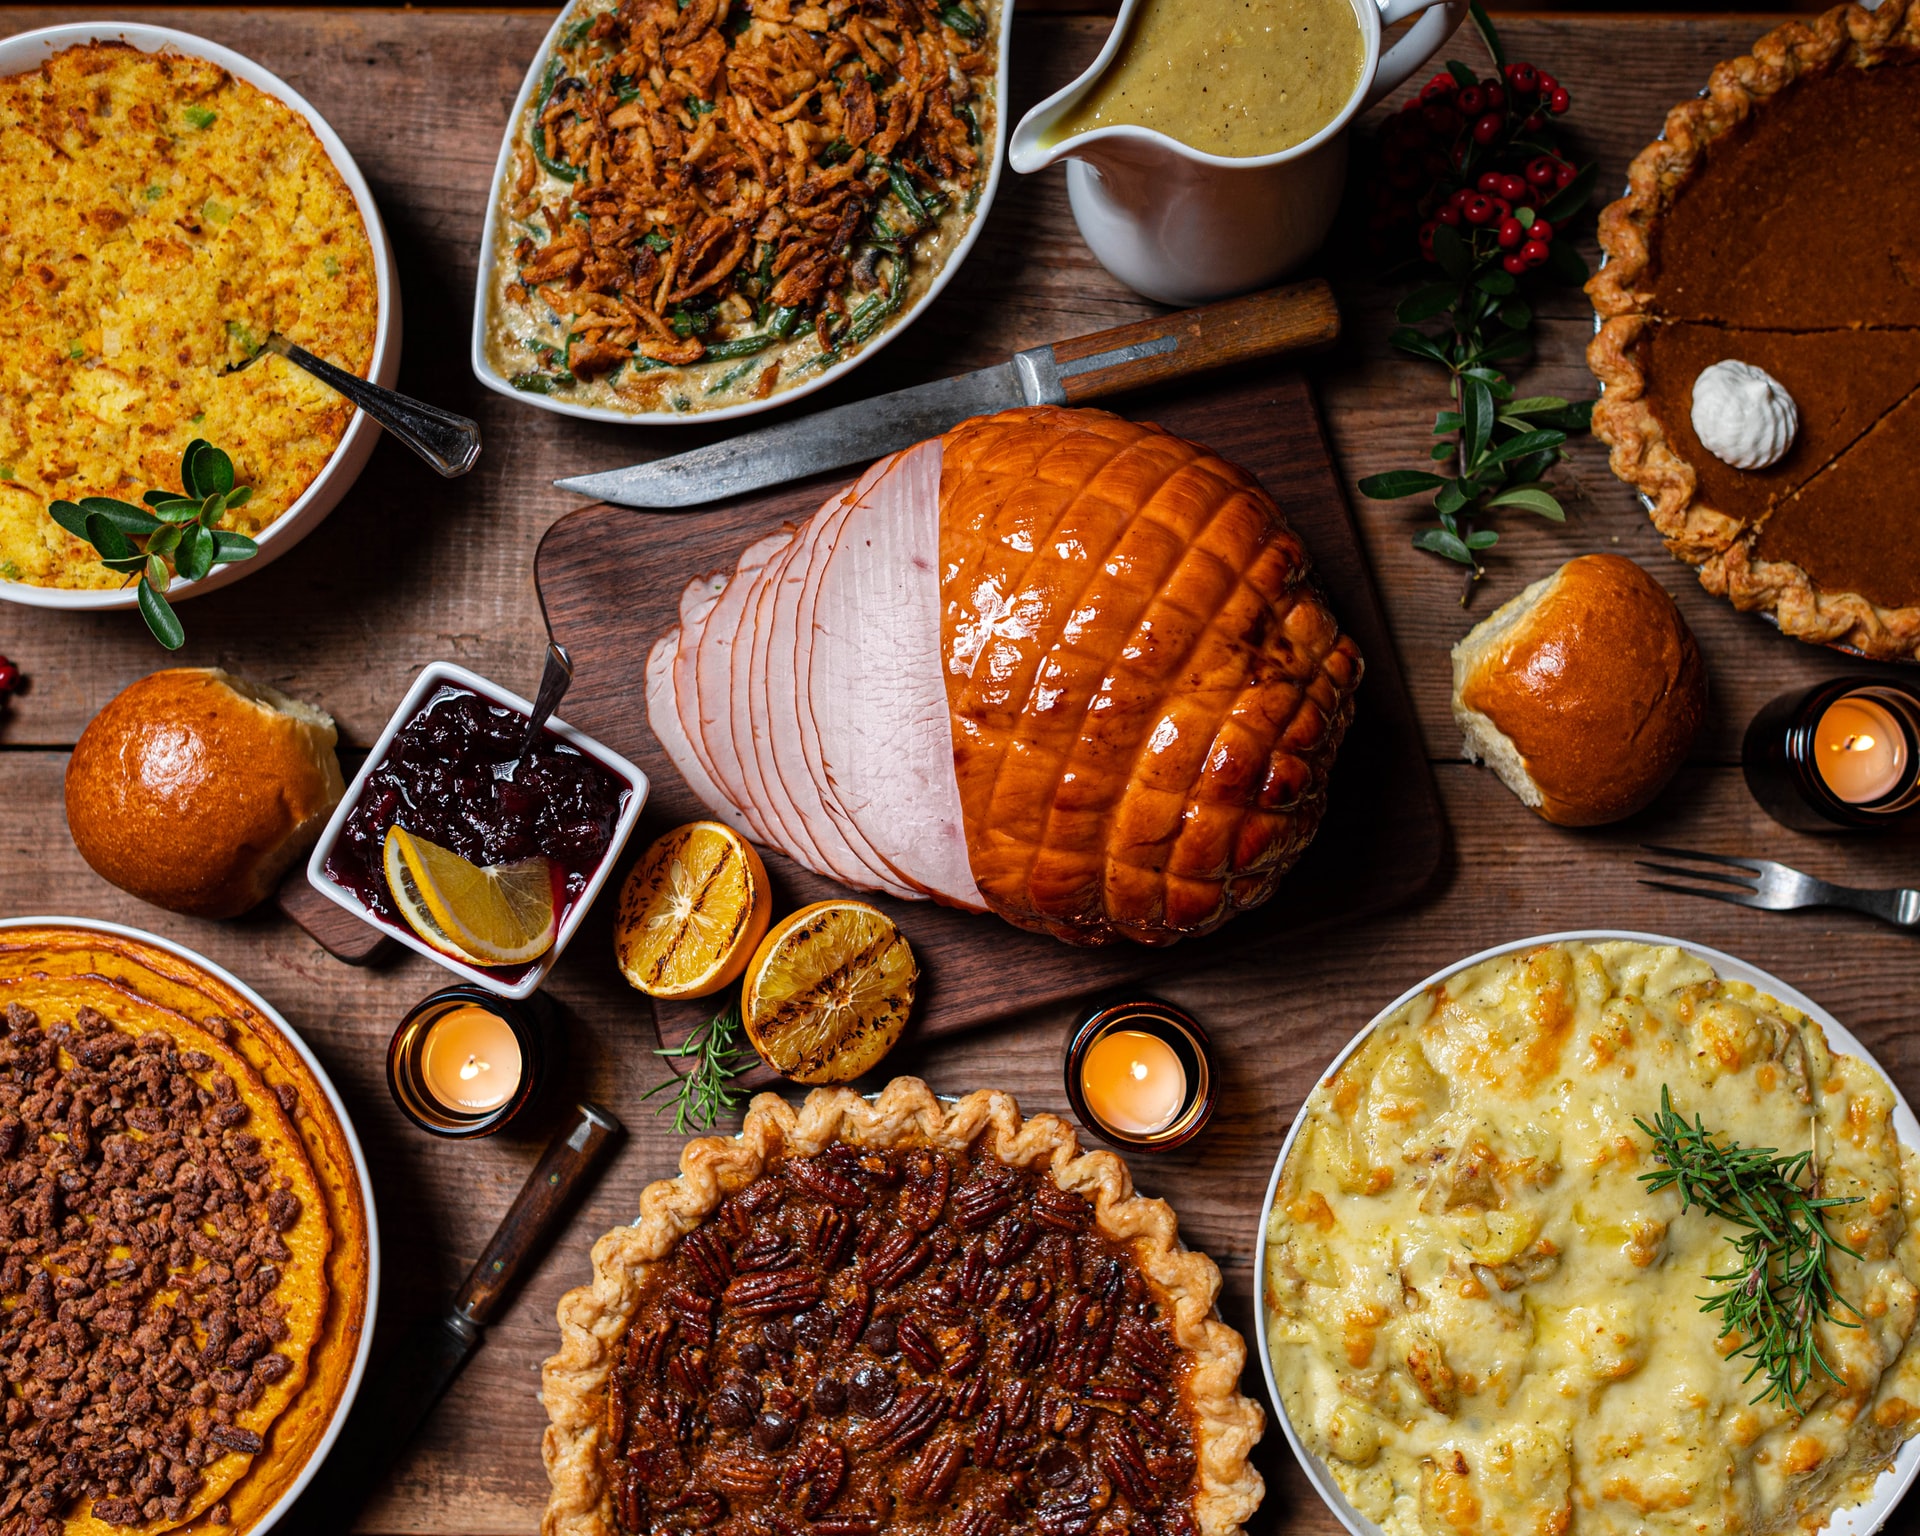 A wooden table with ham, pies, and other sumptuous food.